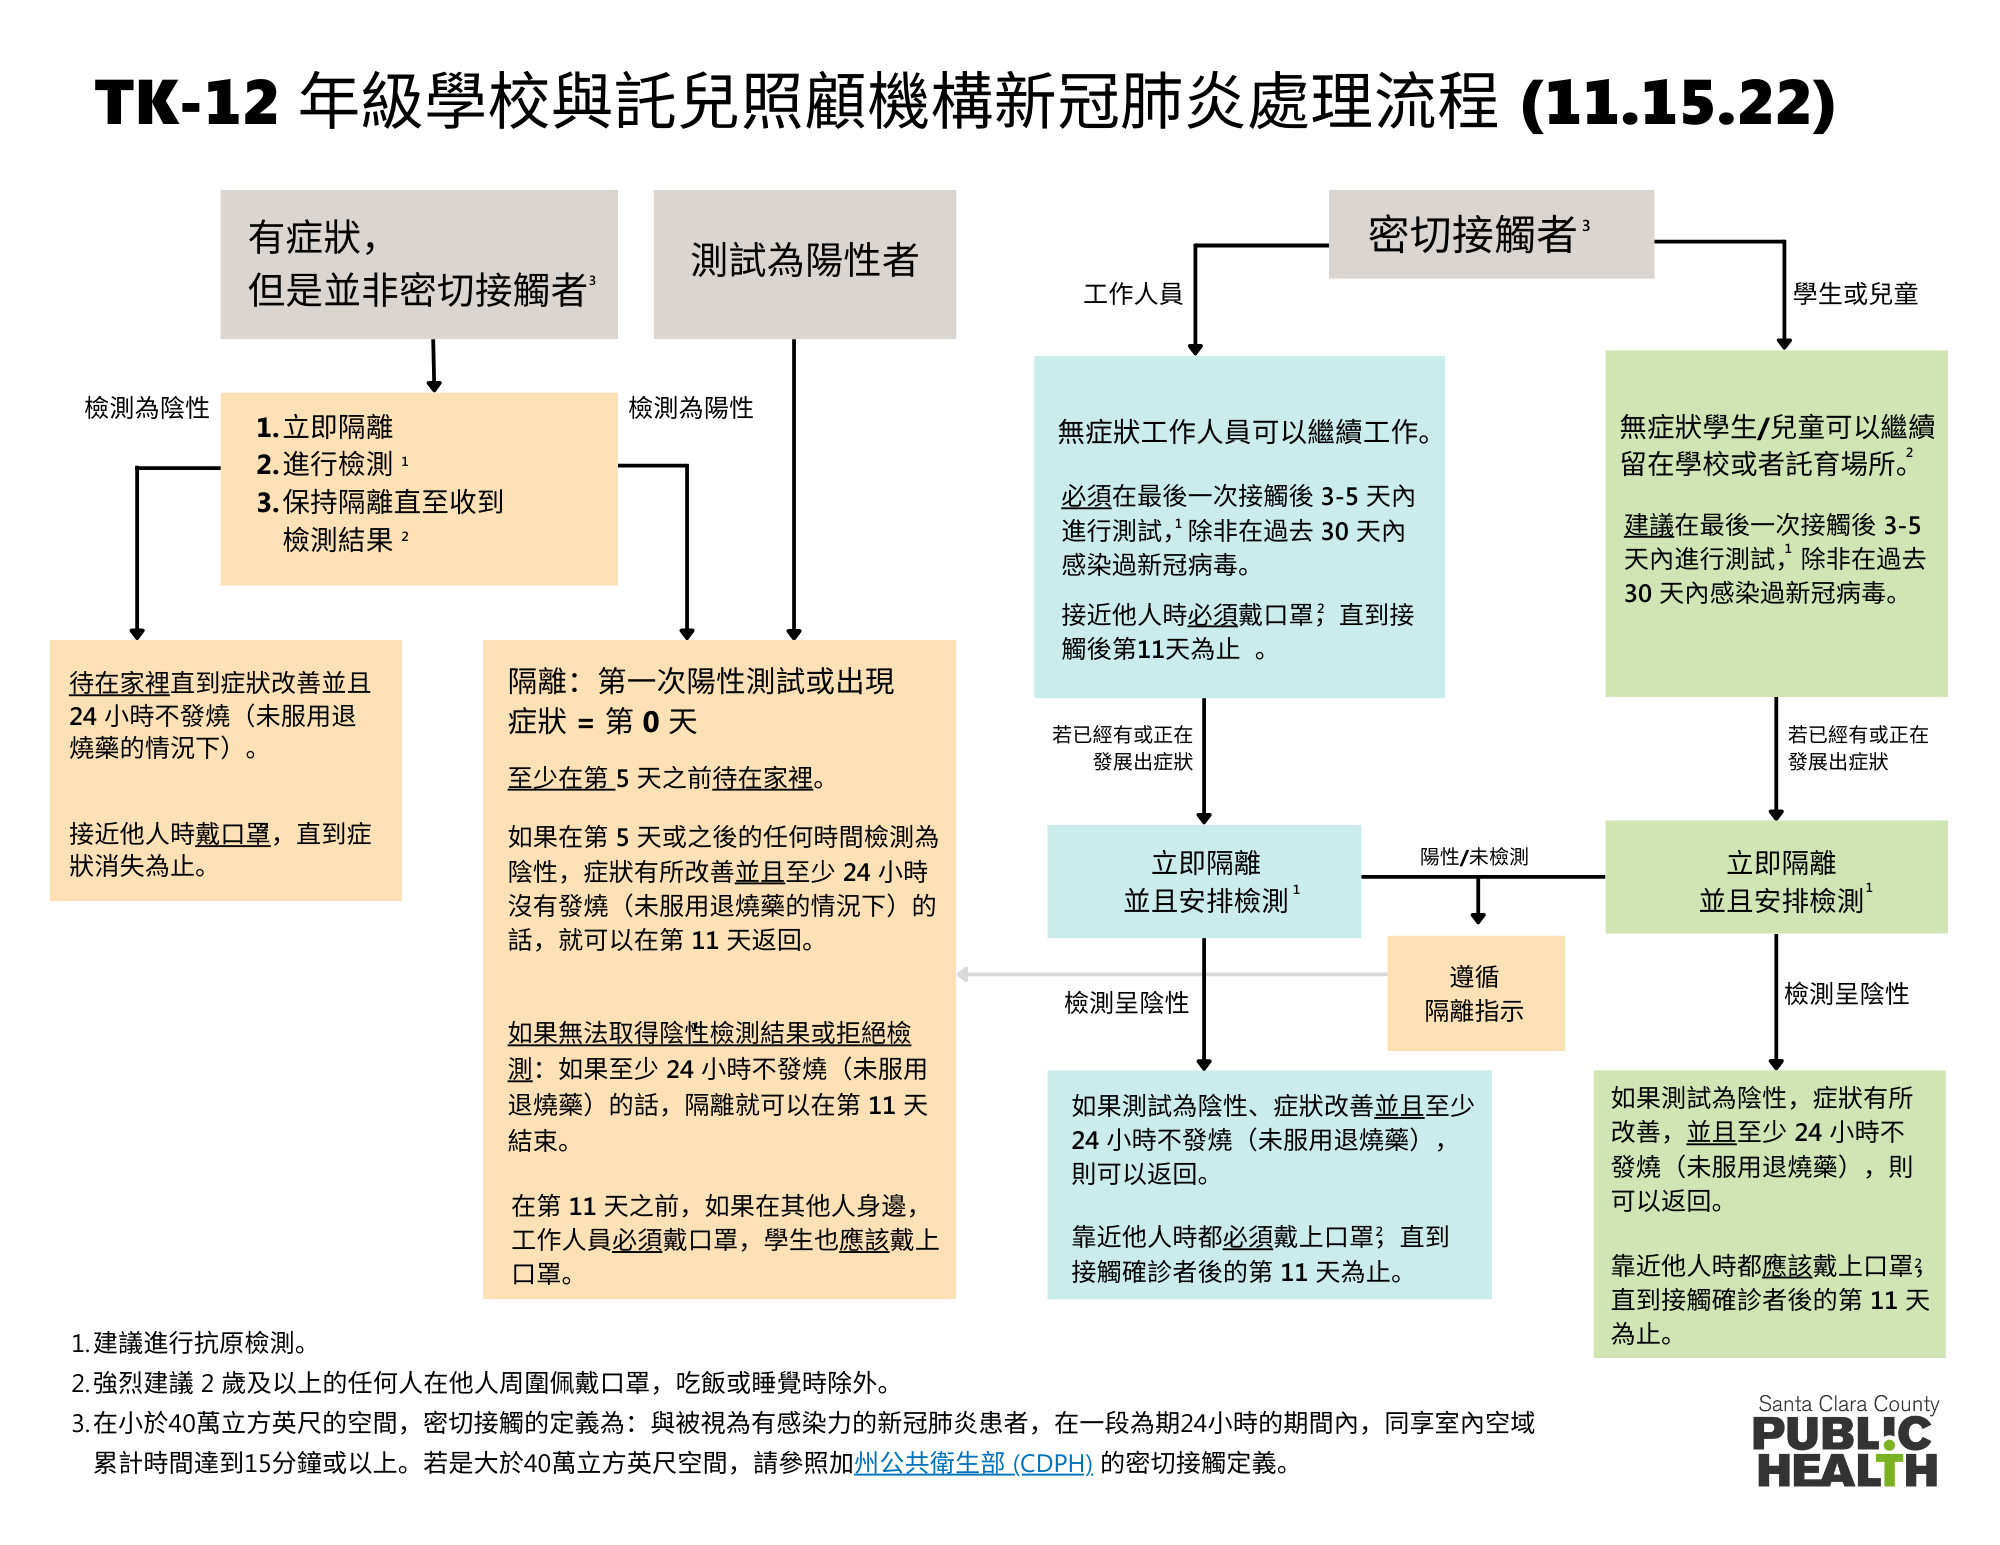 COVID-19 decision tree in Chinese